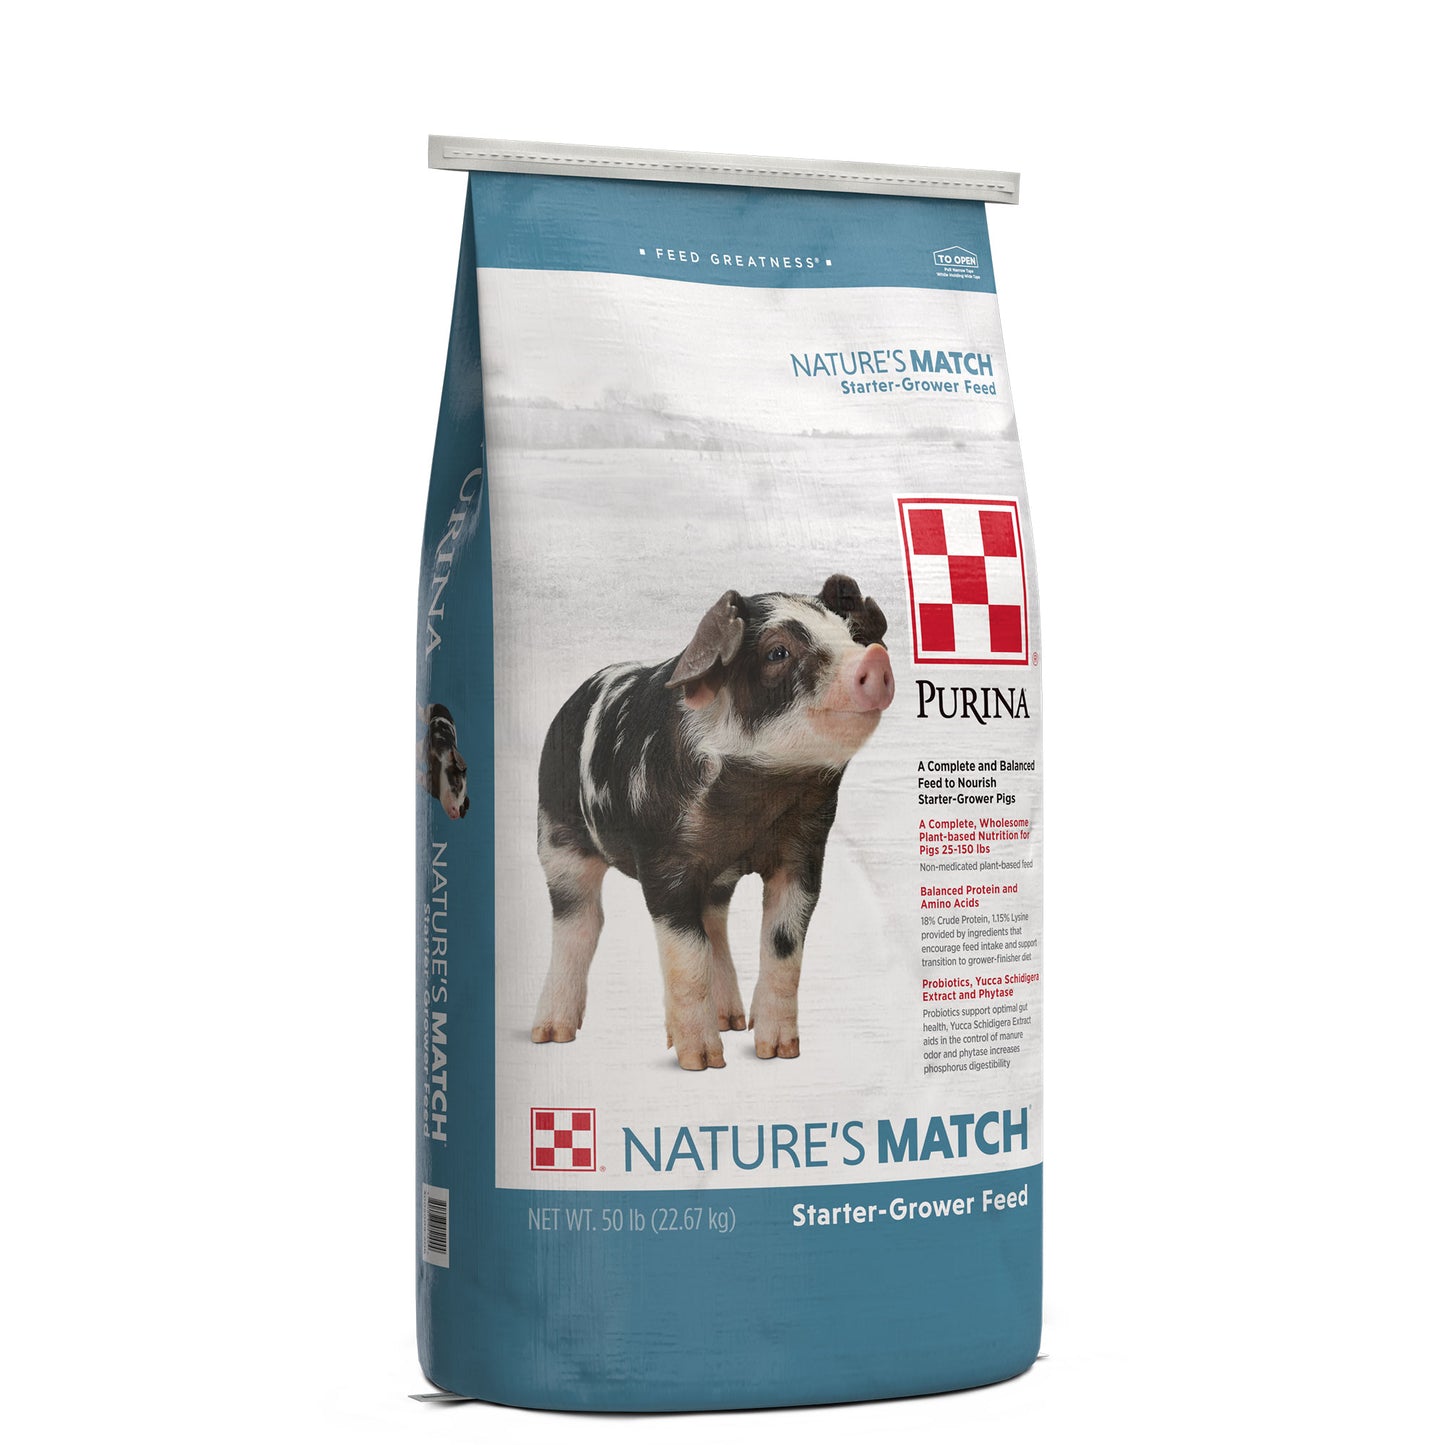 Left Angle of Nature's Match Starter-Grower 50 Pound Bag